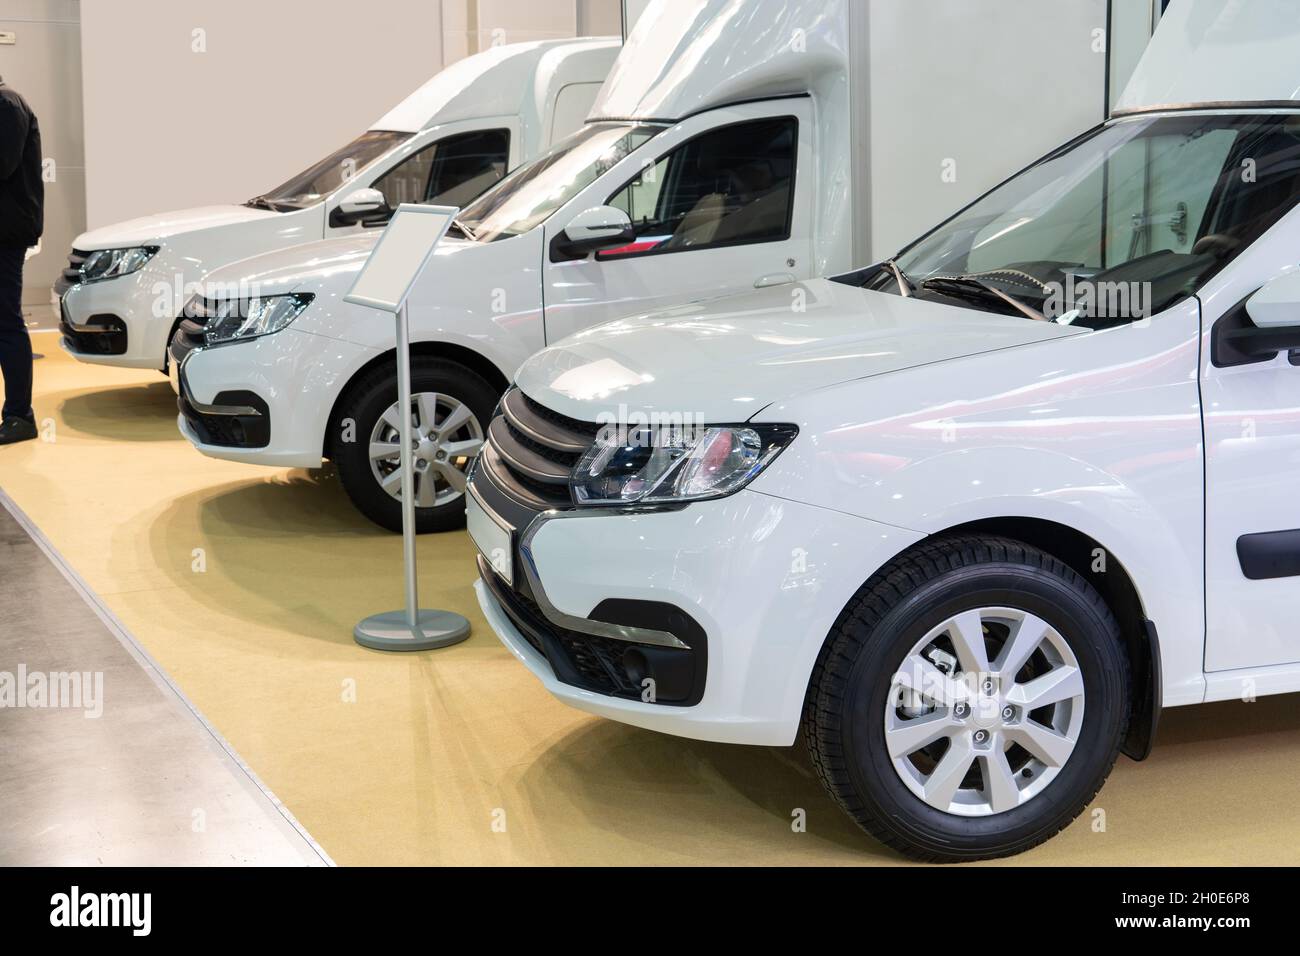 Showroom of a dealer selling commercial vans Stock Photo